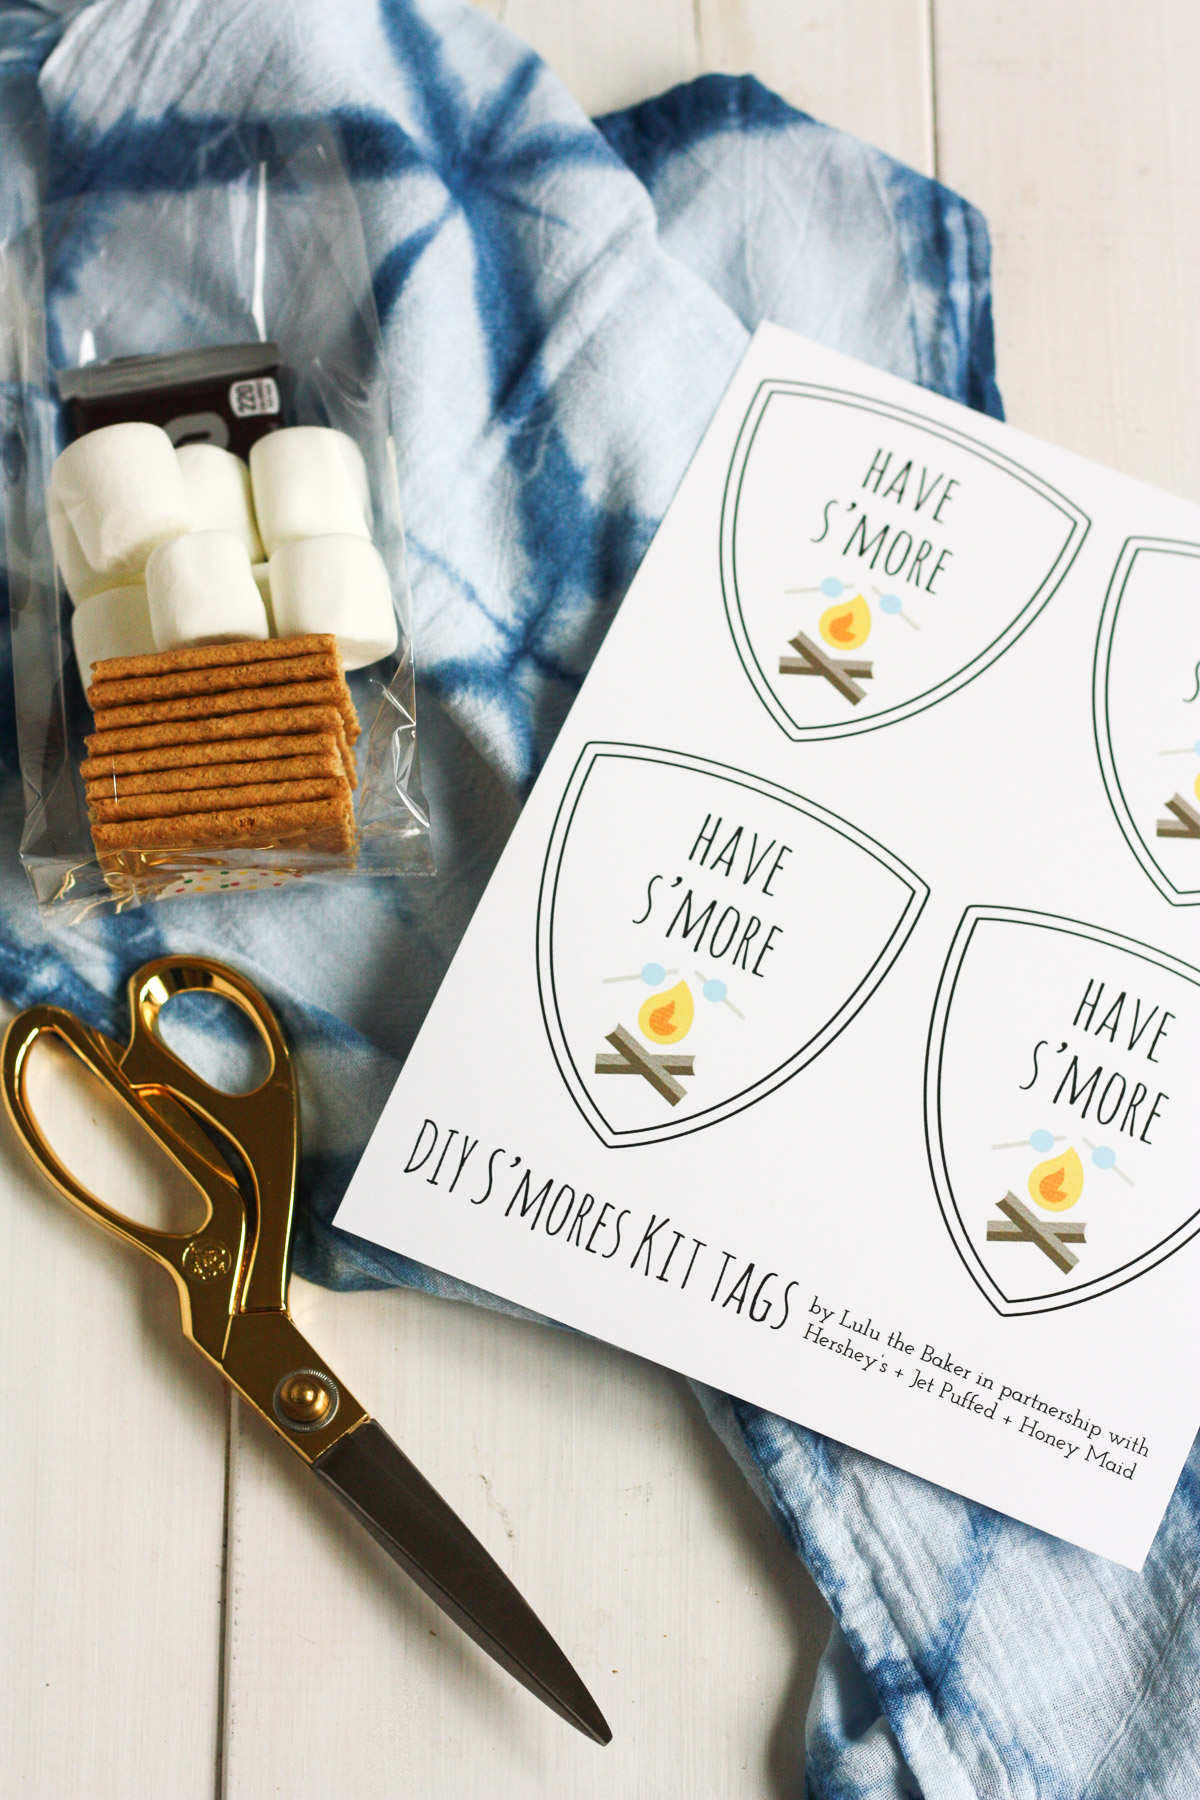 spread s'more love this summer by making these cute DIY s'mores kits for friends, family, and neighbors!